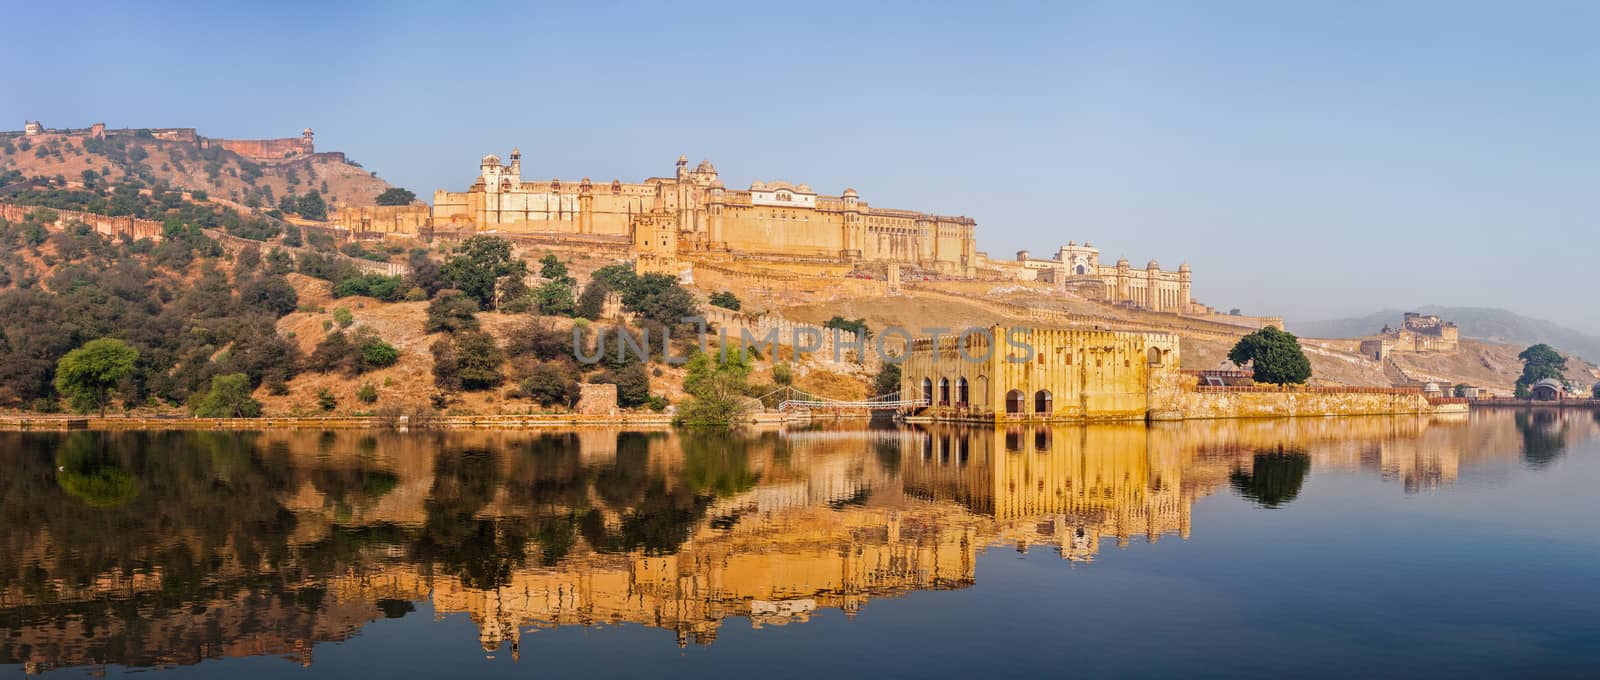 Panorama of Amer (Amber) fort, Rajasthan, India by dimol